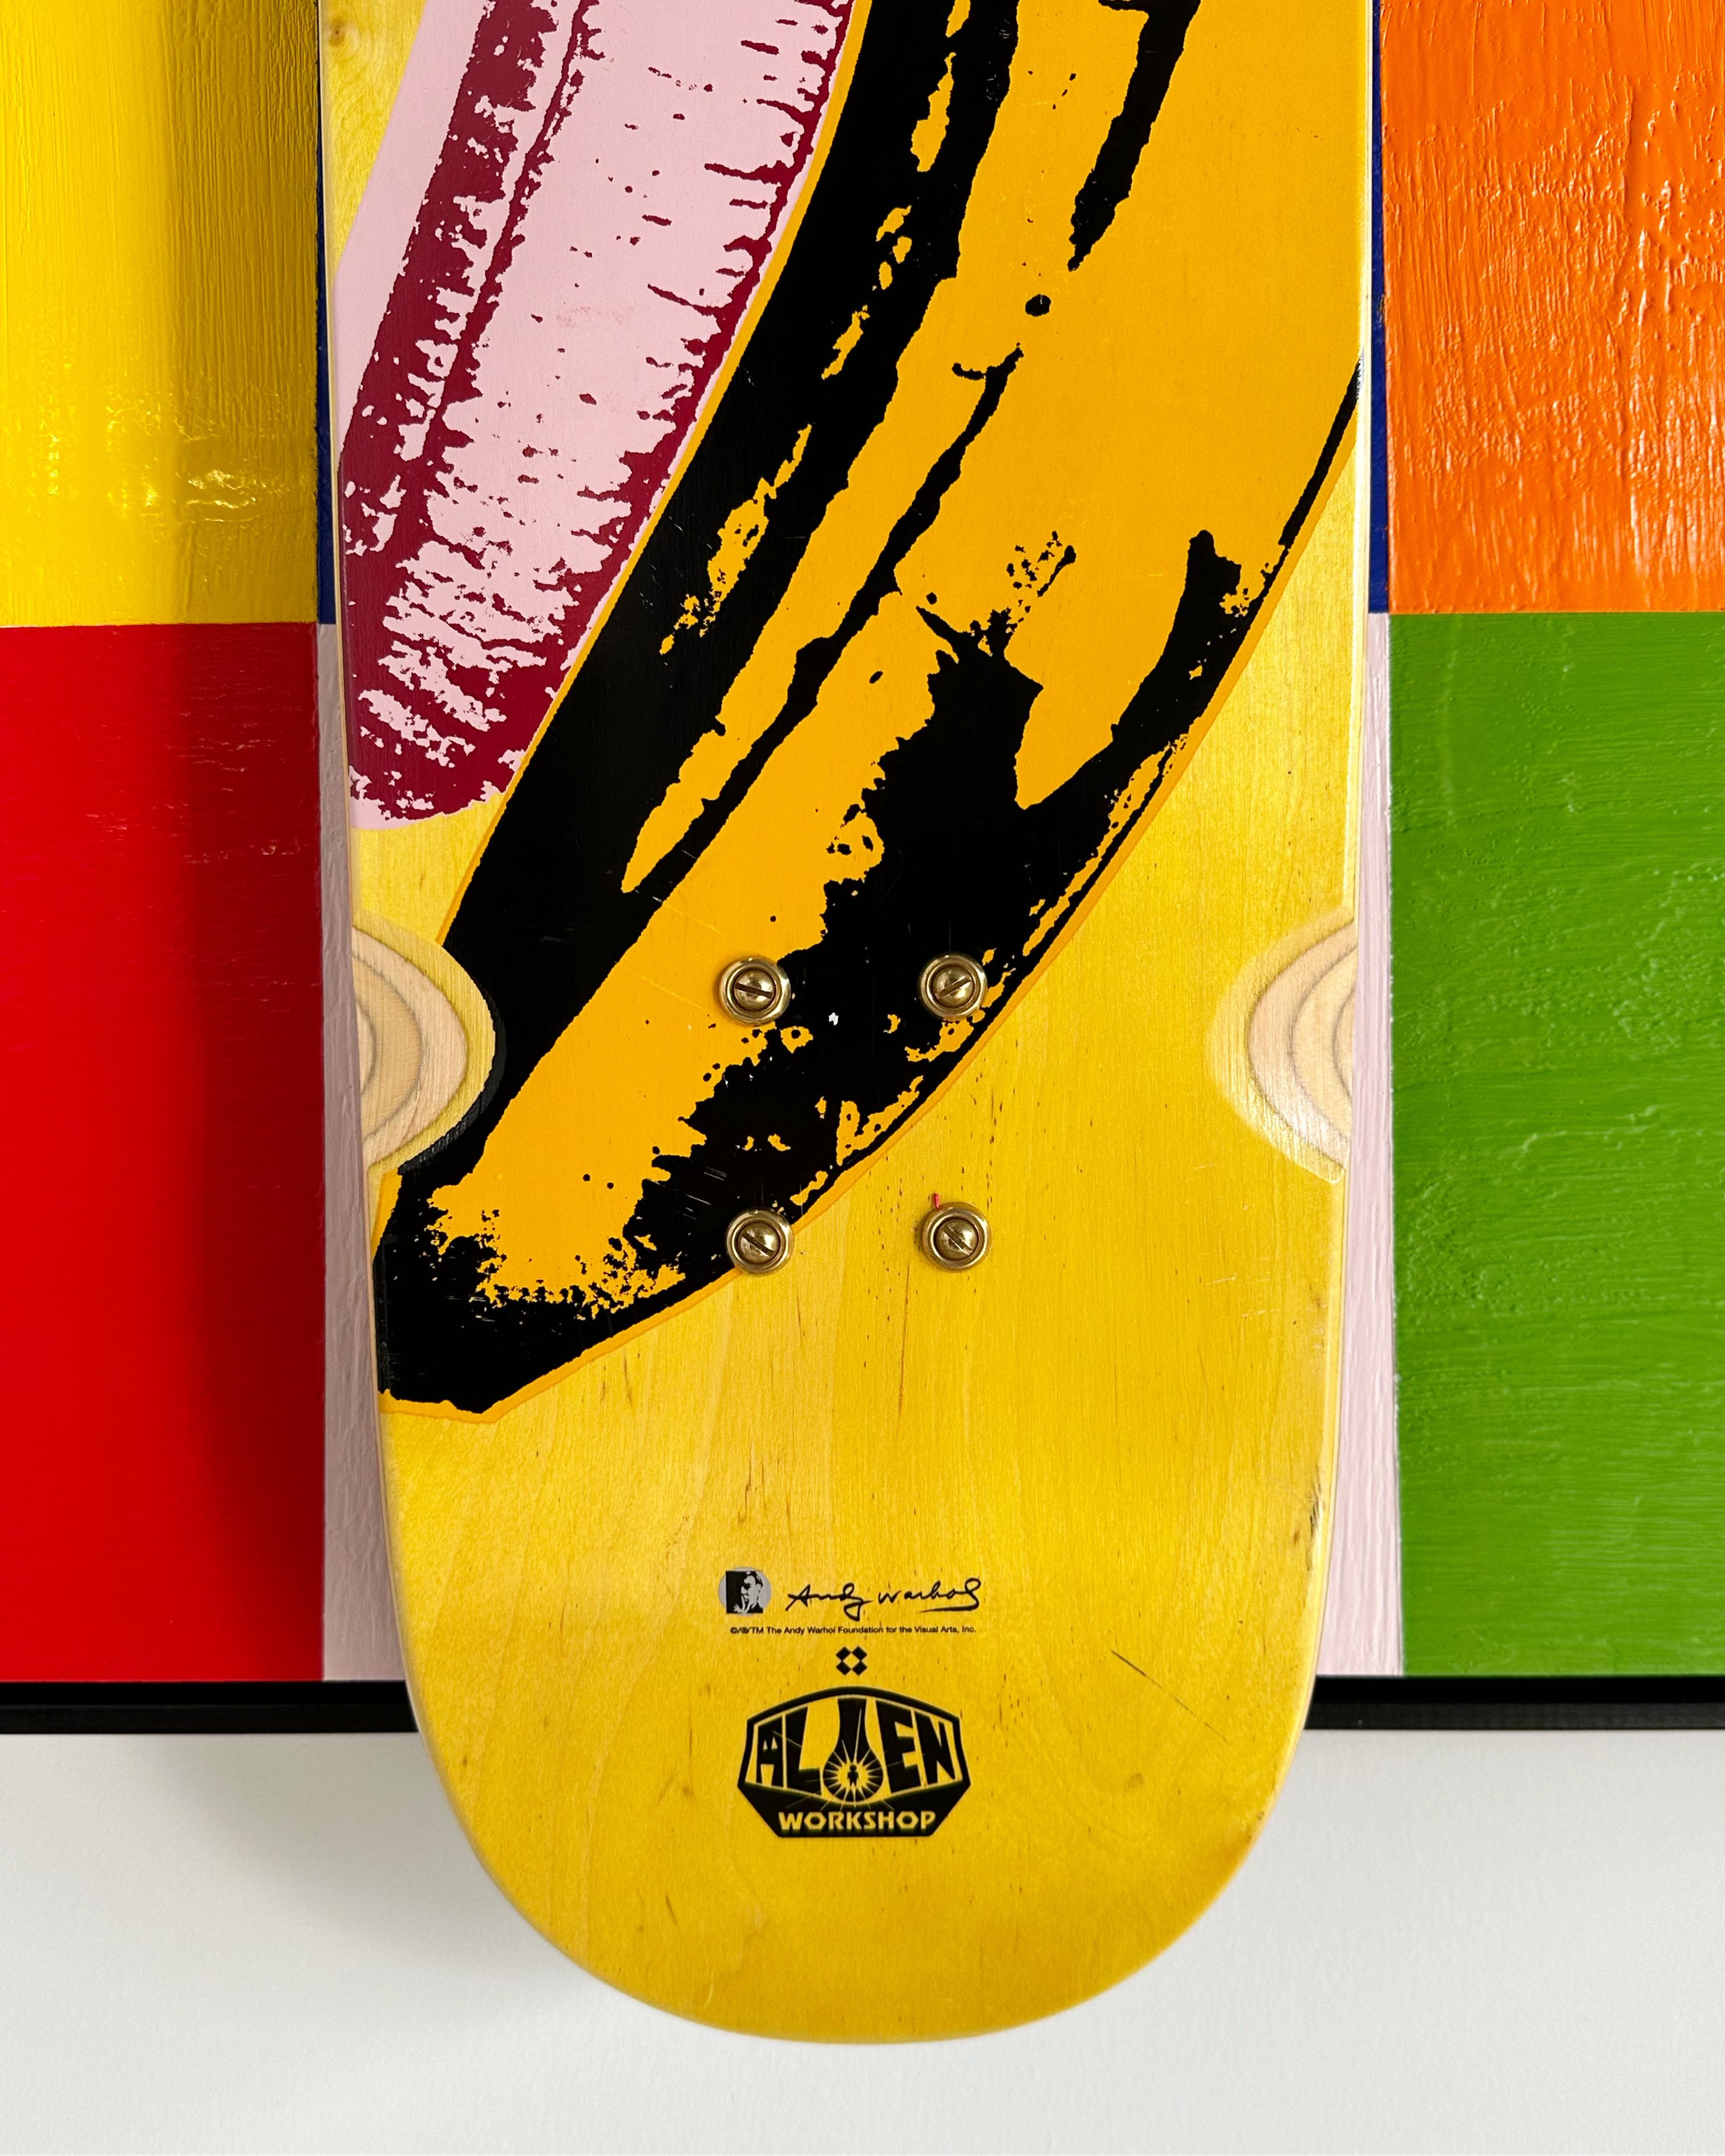 In Deck series. Encaustic and Andy Warhol Foundation x Alien Workshop Skate Deck float-mounted on board.

Art Dimensions: 30 x 30 H inches and Framed Dimensions: 31 W x 31 H inches. 

About the Deck | Rare, Out of Print Andy Warhol Banana Skate